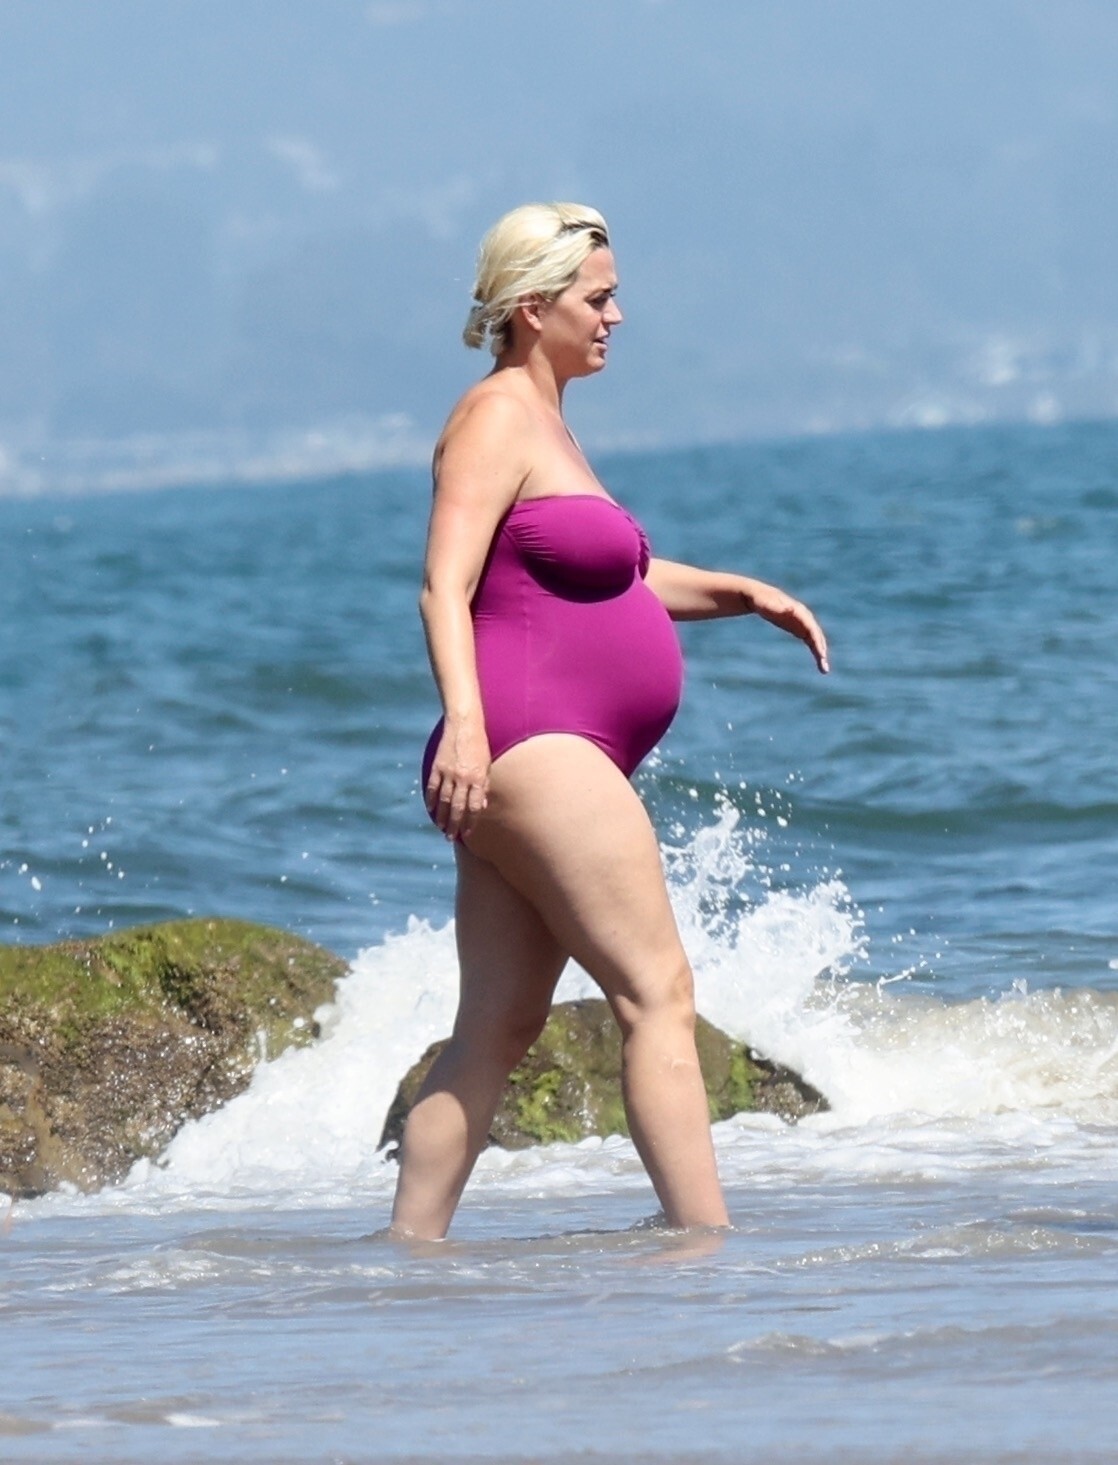 Katy Perry In A Sexy Bikini On The Beach While Pregnant TheFappening Pro 45 - Katy Perry Sexy Pregnant (52 Photos)